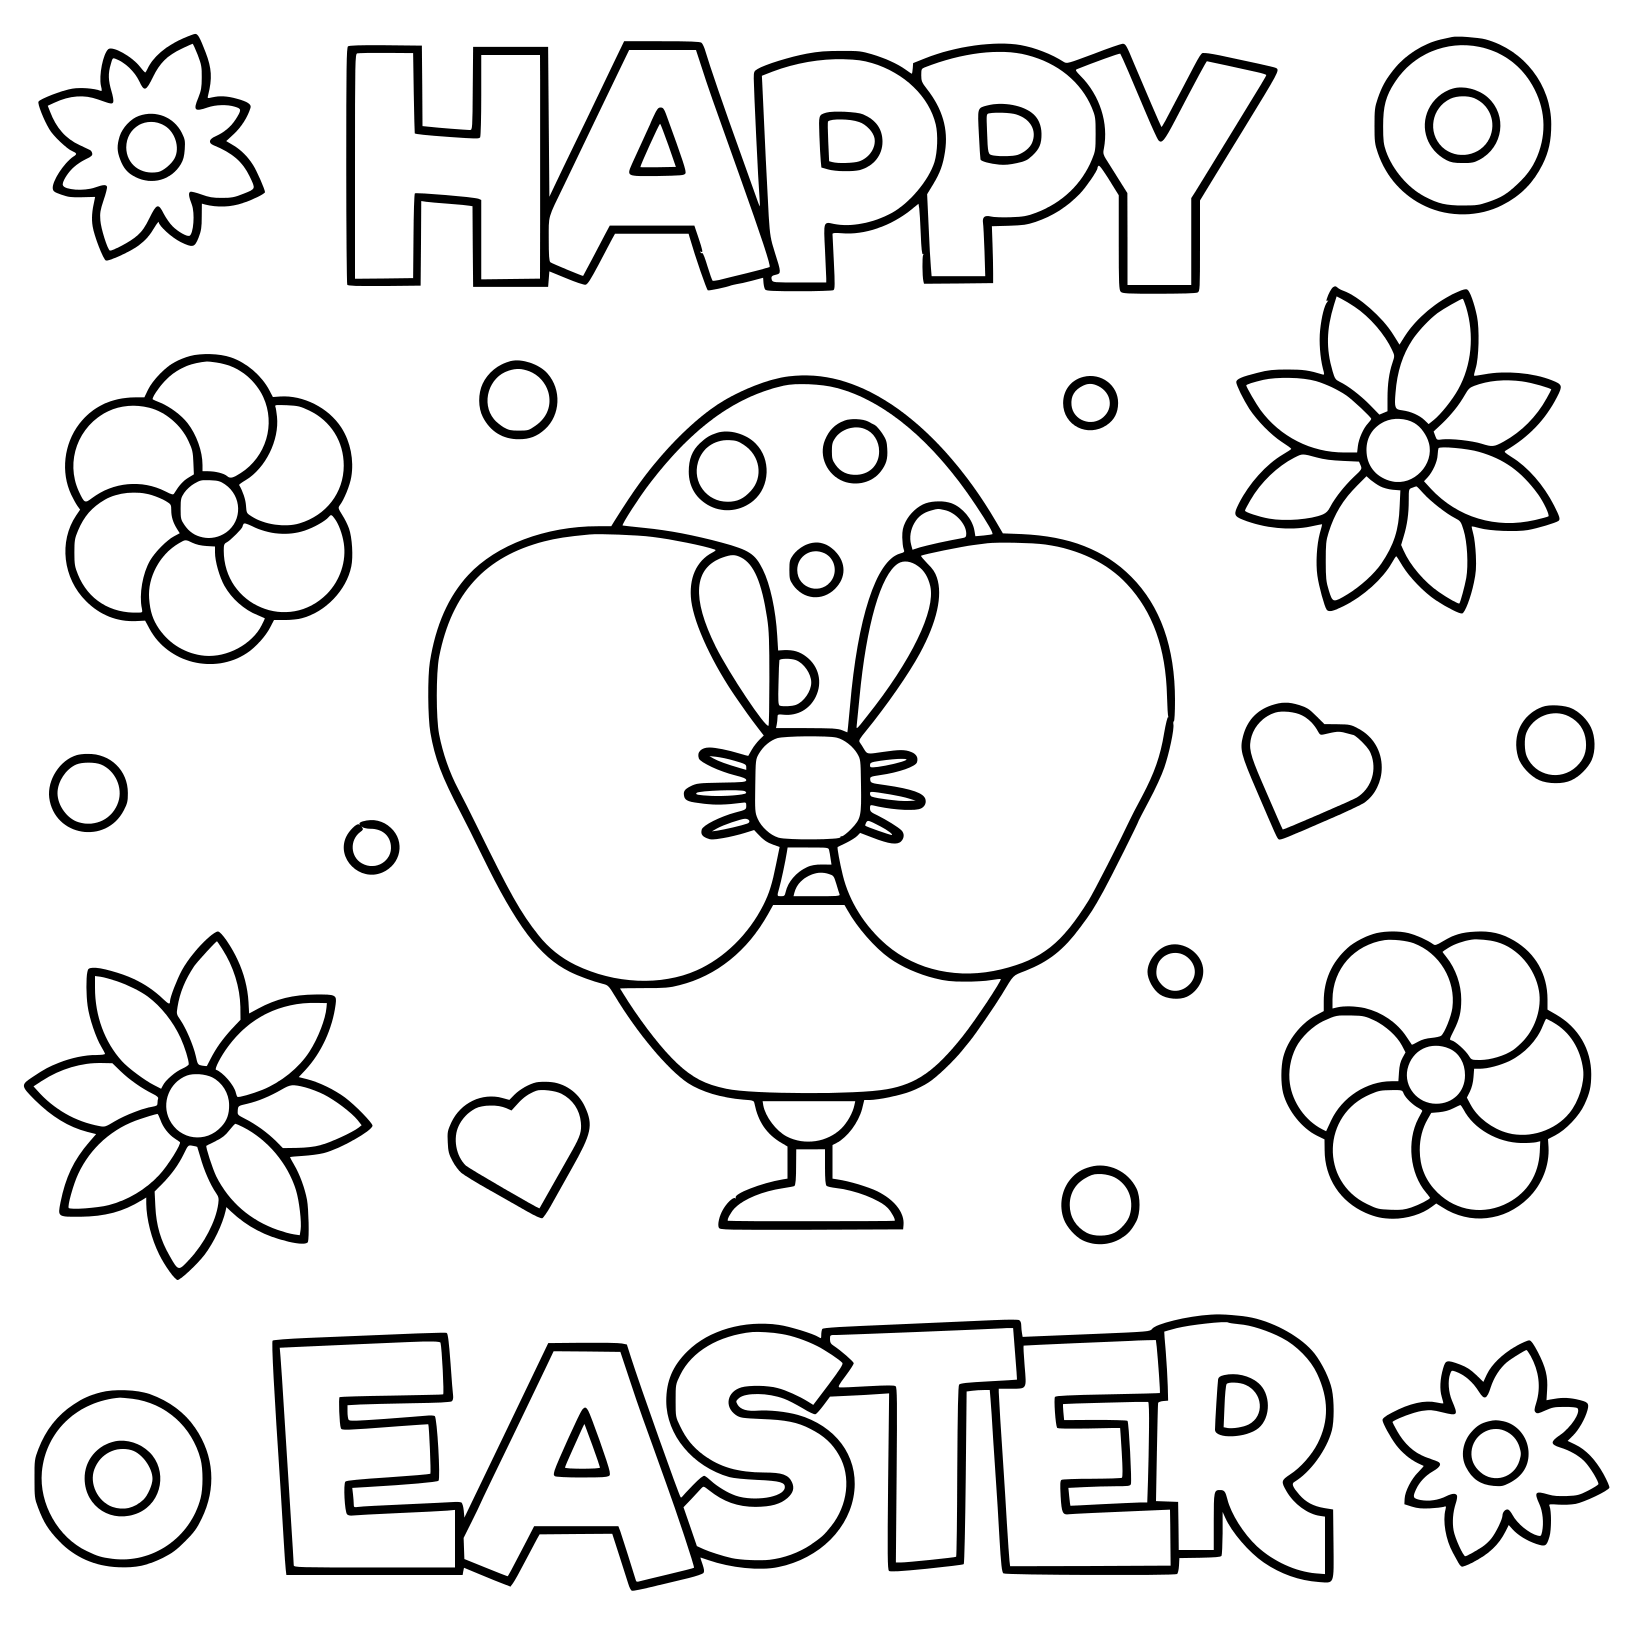 Happy Easter Egg Vector Illustration Coloring Page